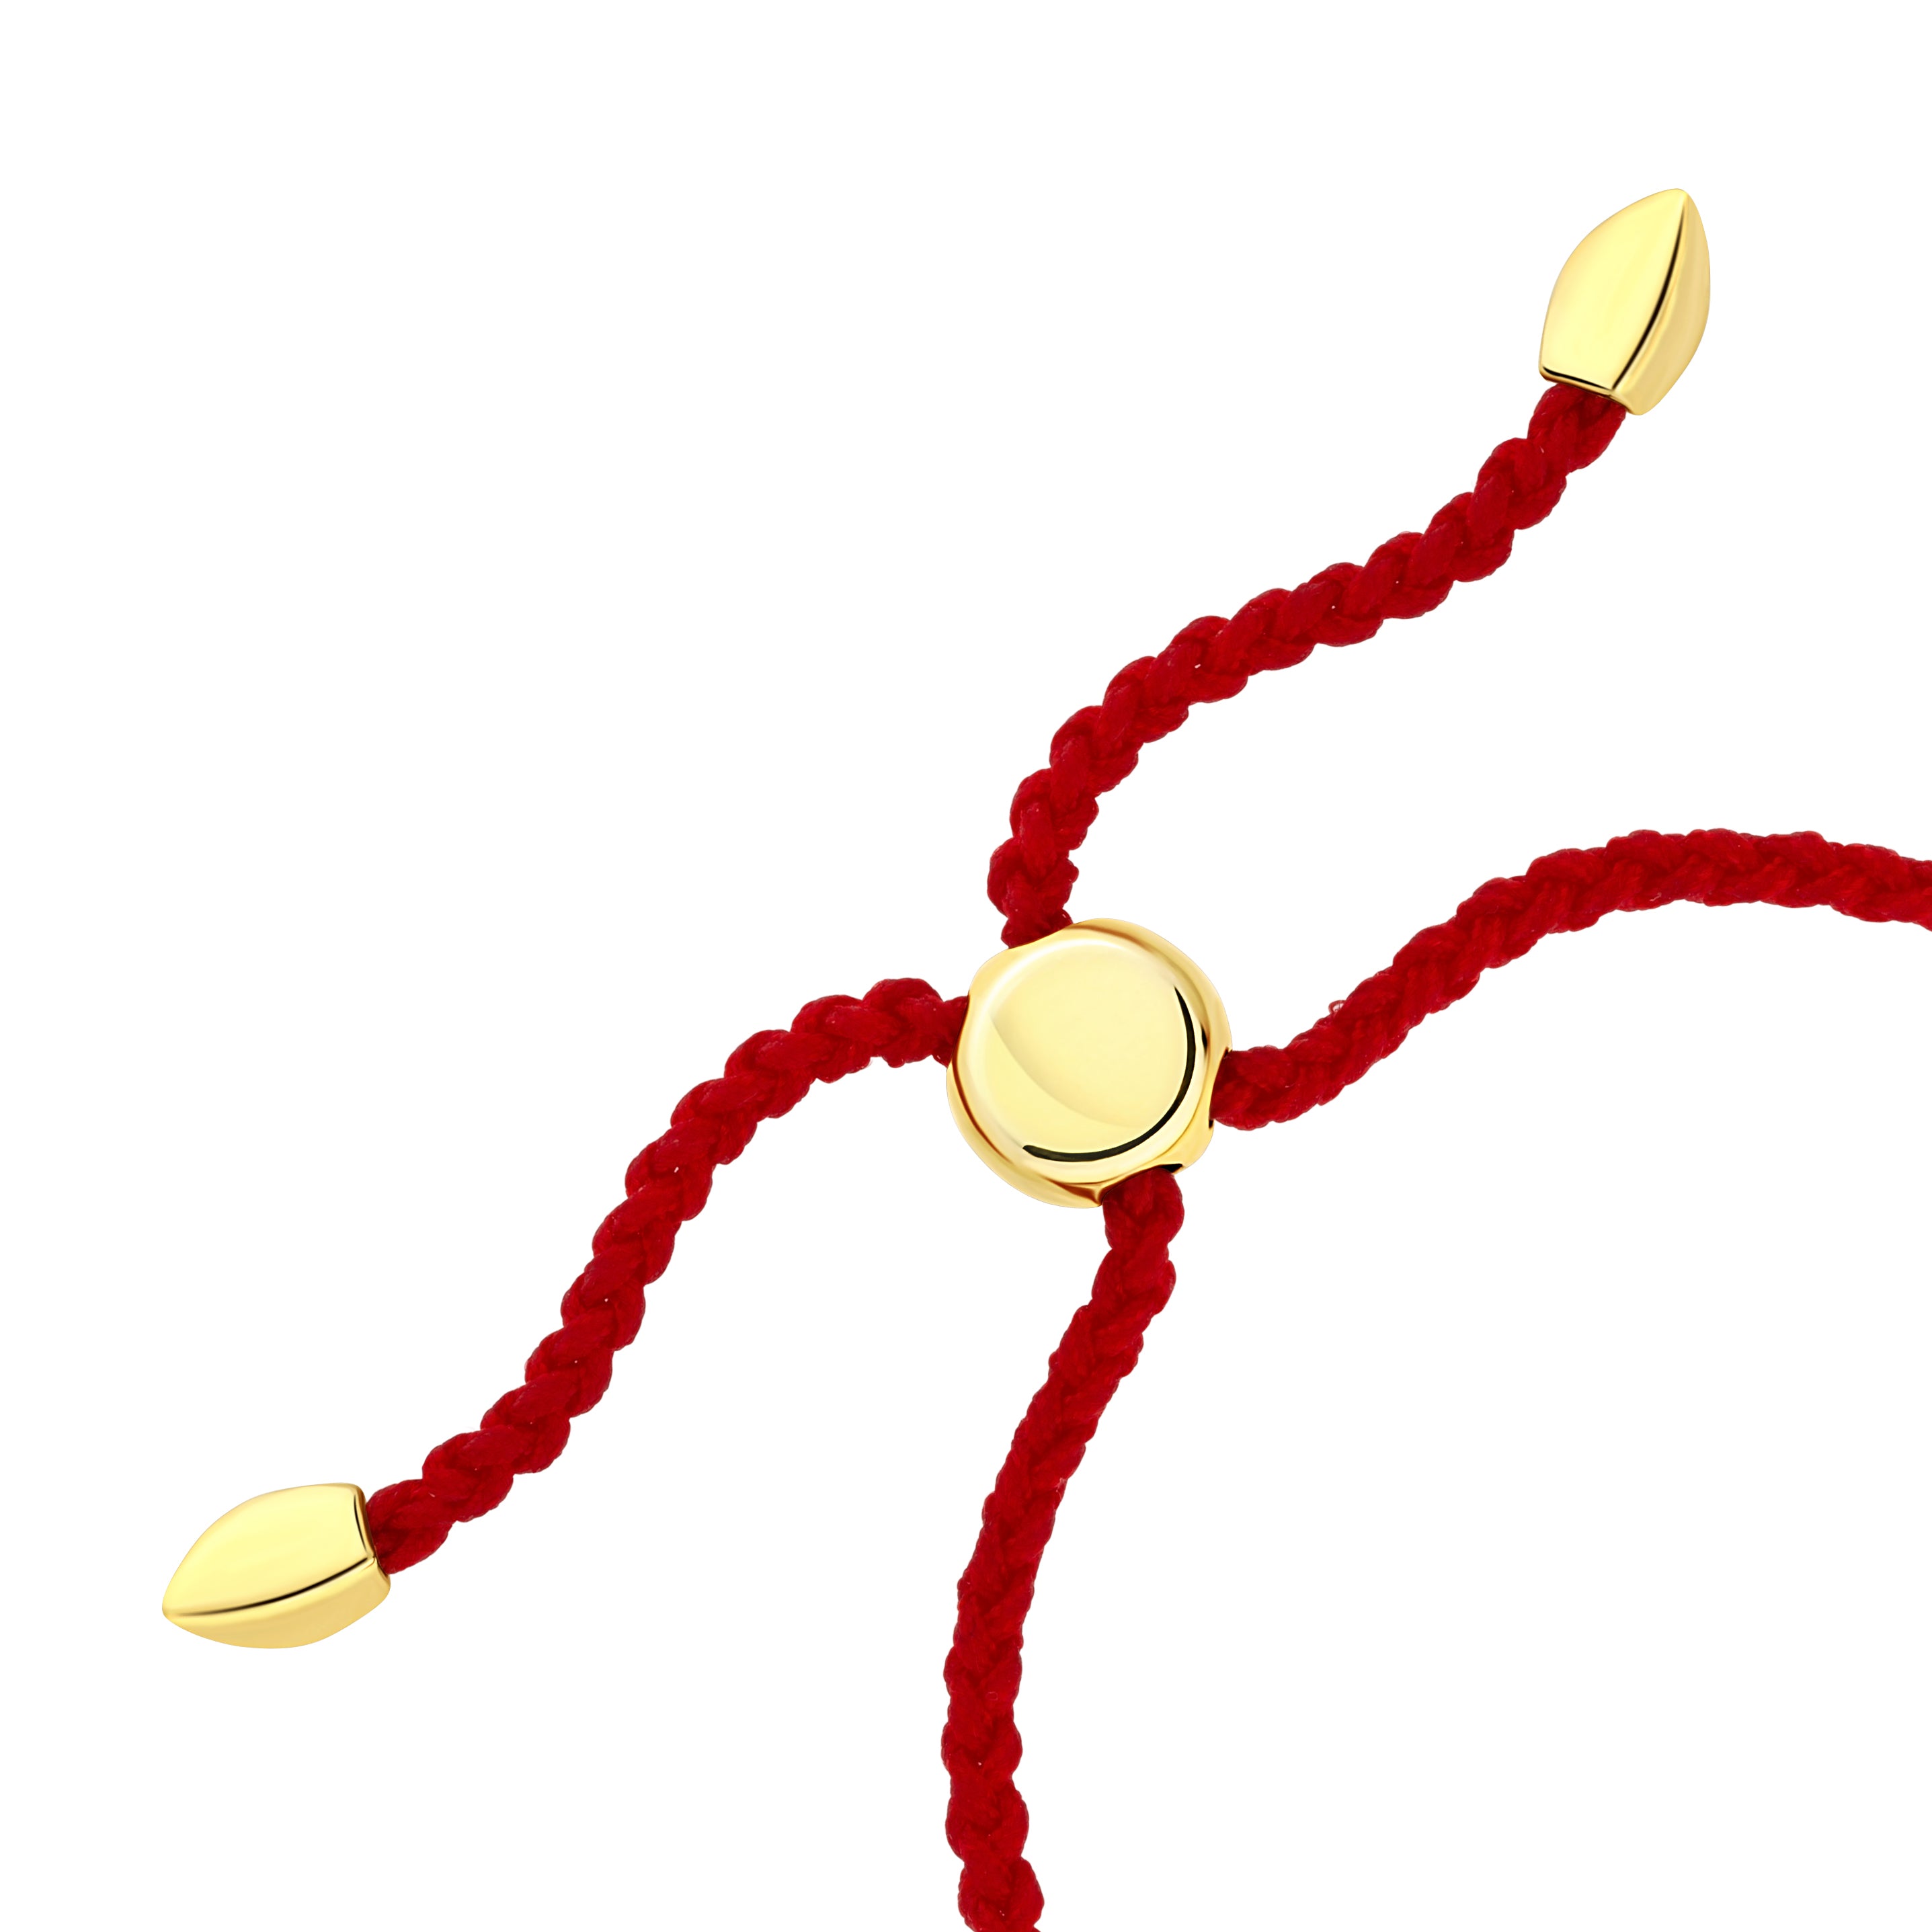 Sula bracelet in gold plating with red cord